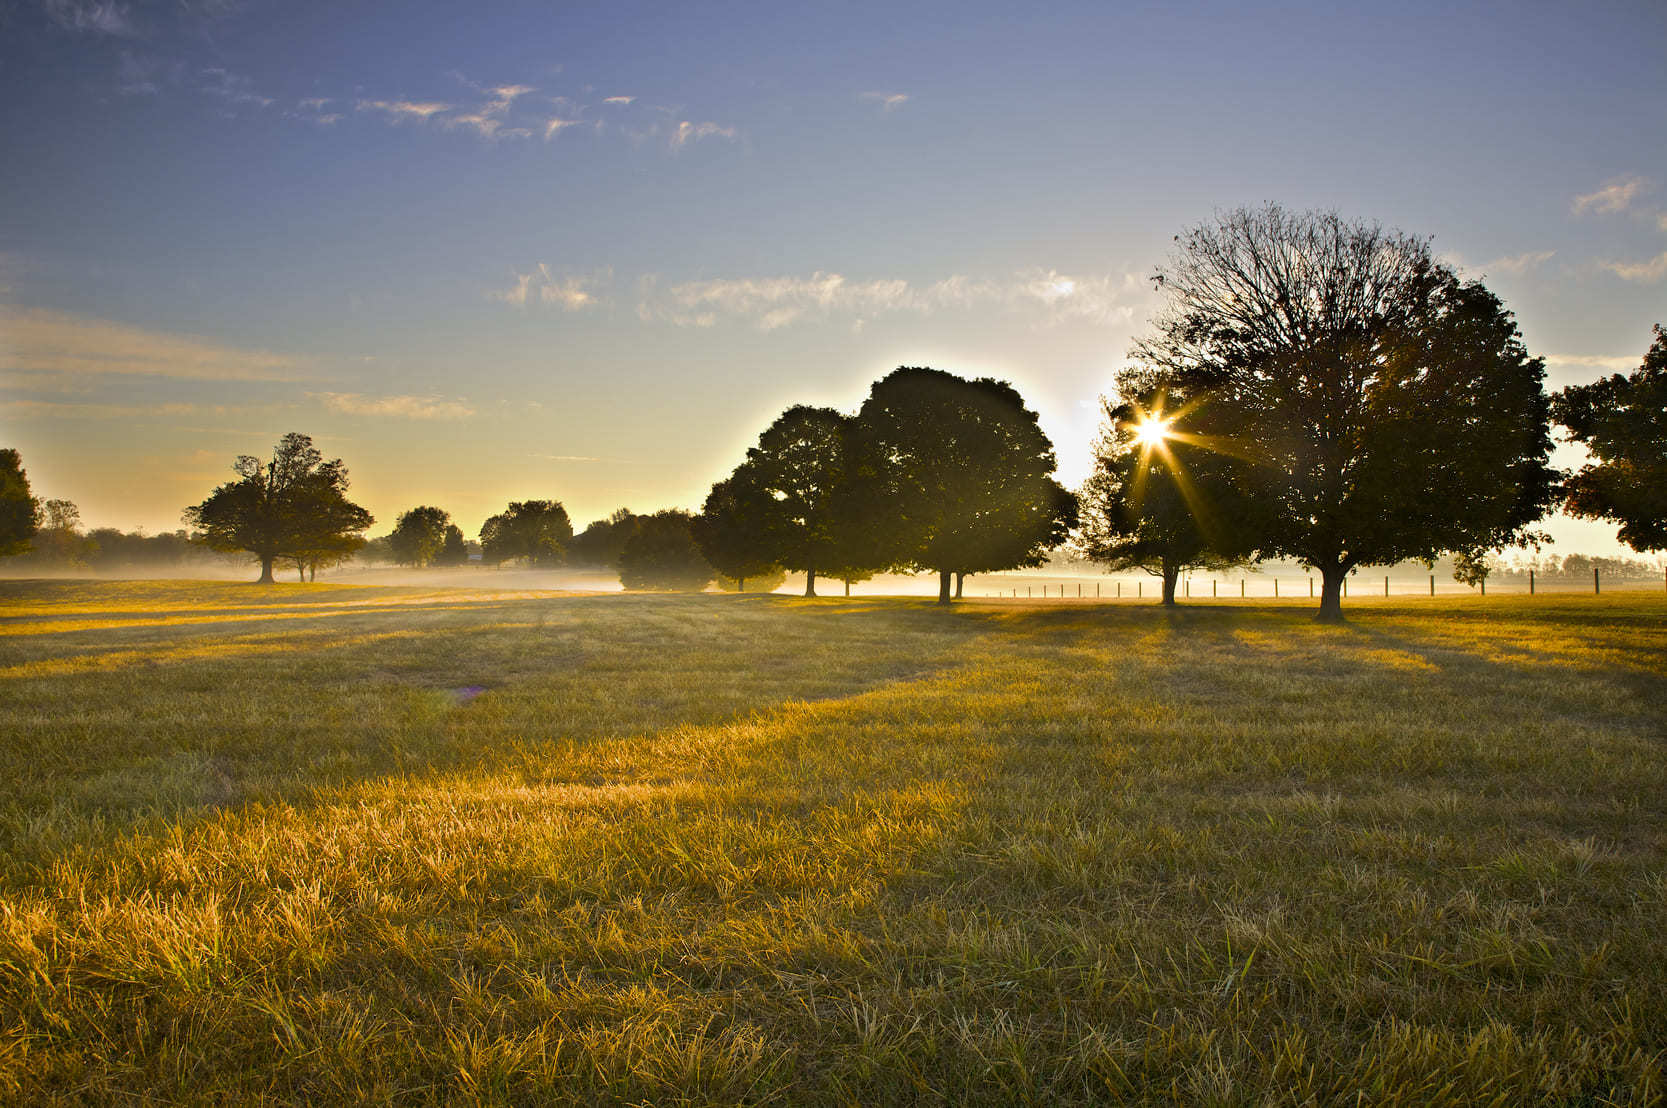 Sun rising over trees in a field in the Kentucky countryside